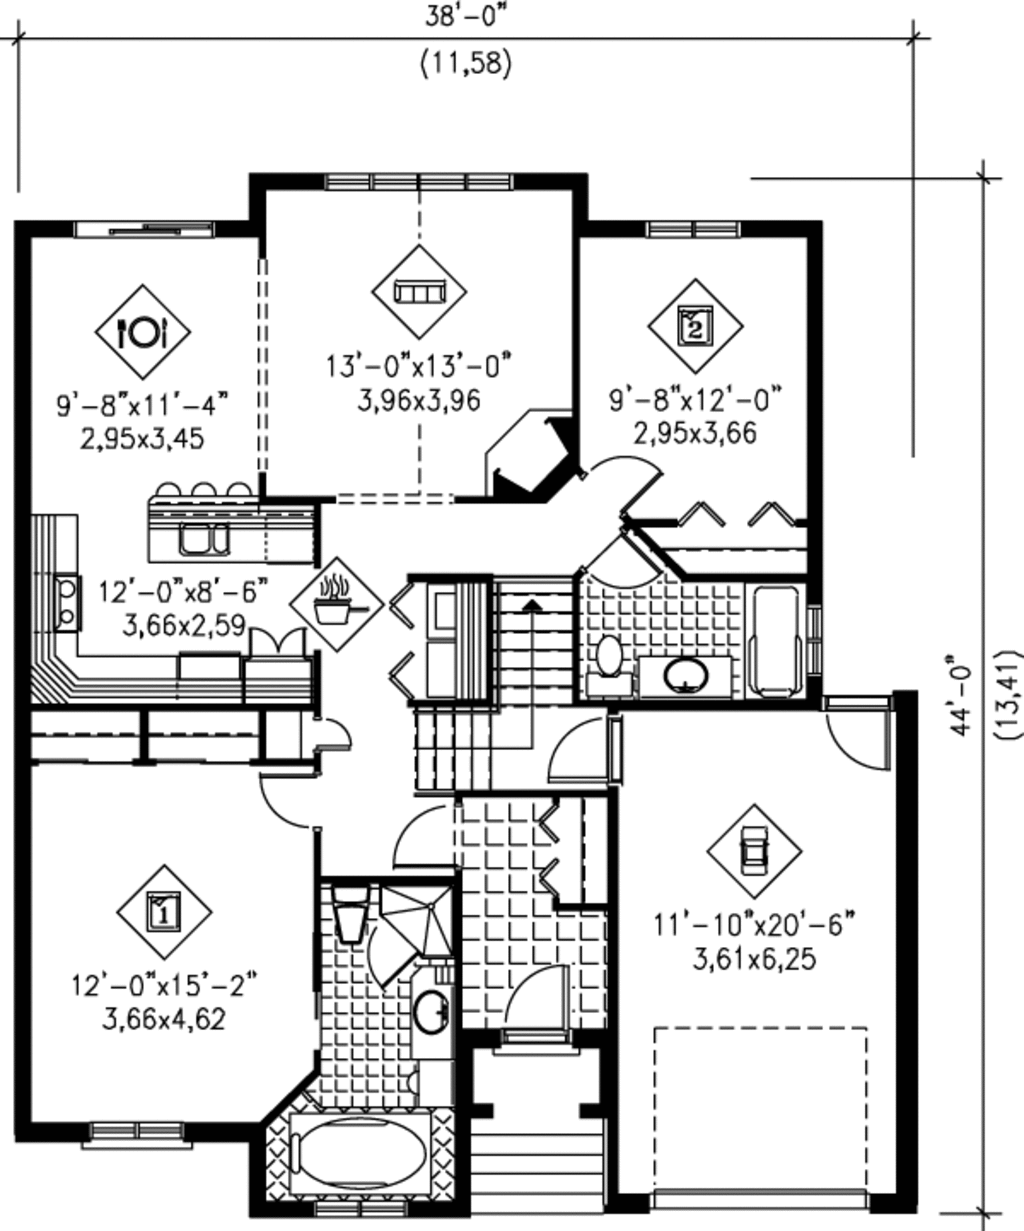 One bedroom house plan